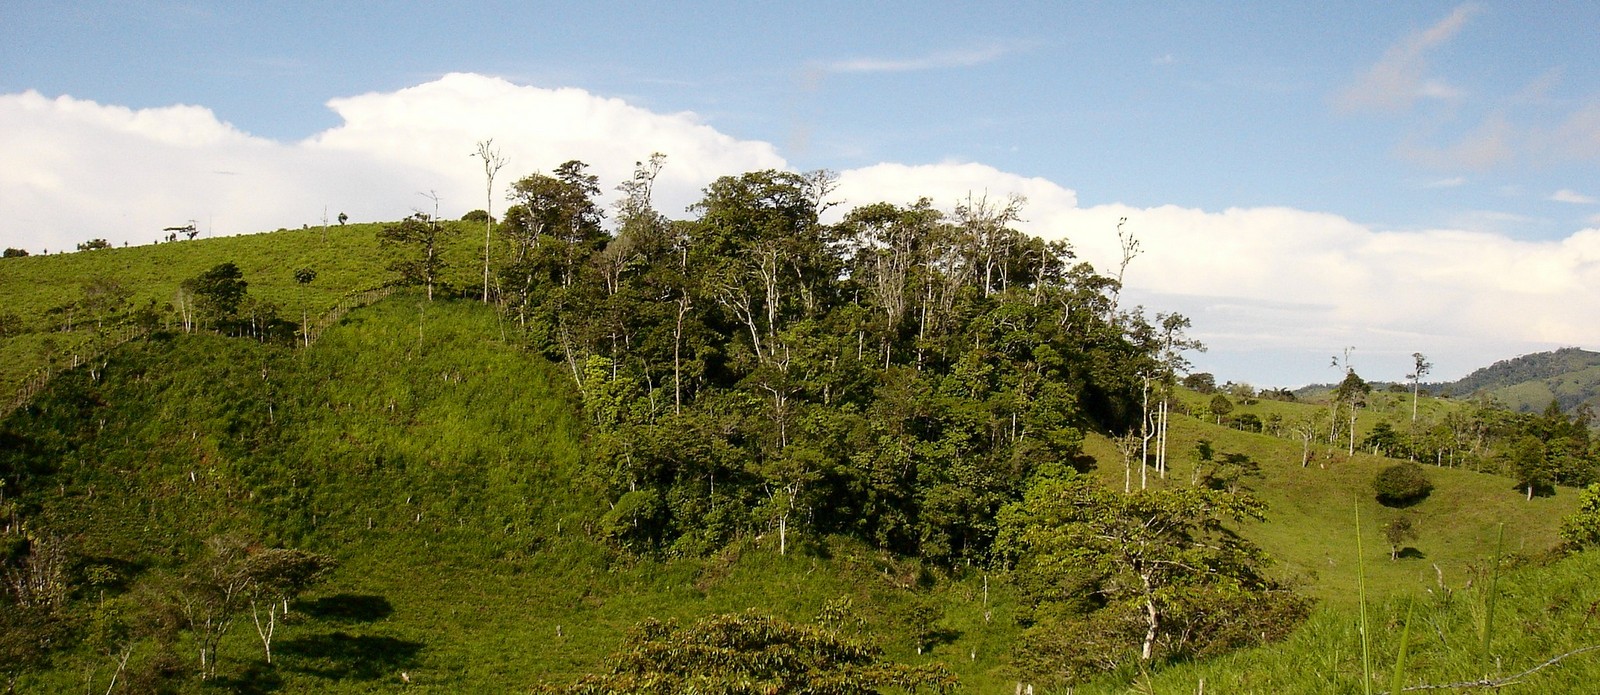 One hectare forest fragment, Coto Brus, Costa Rica